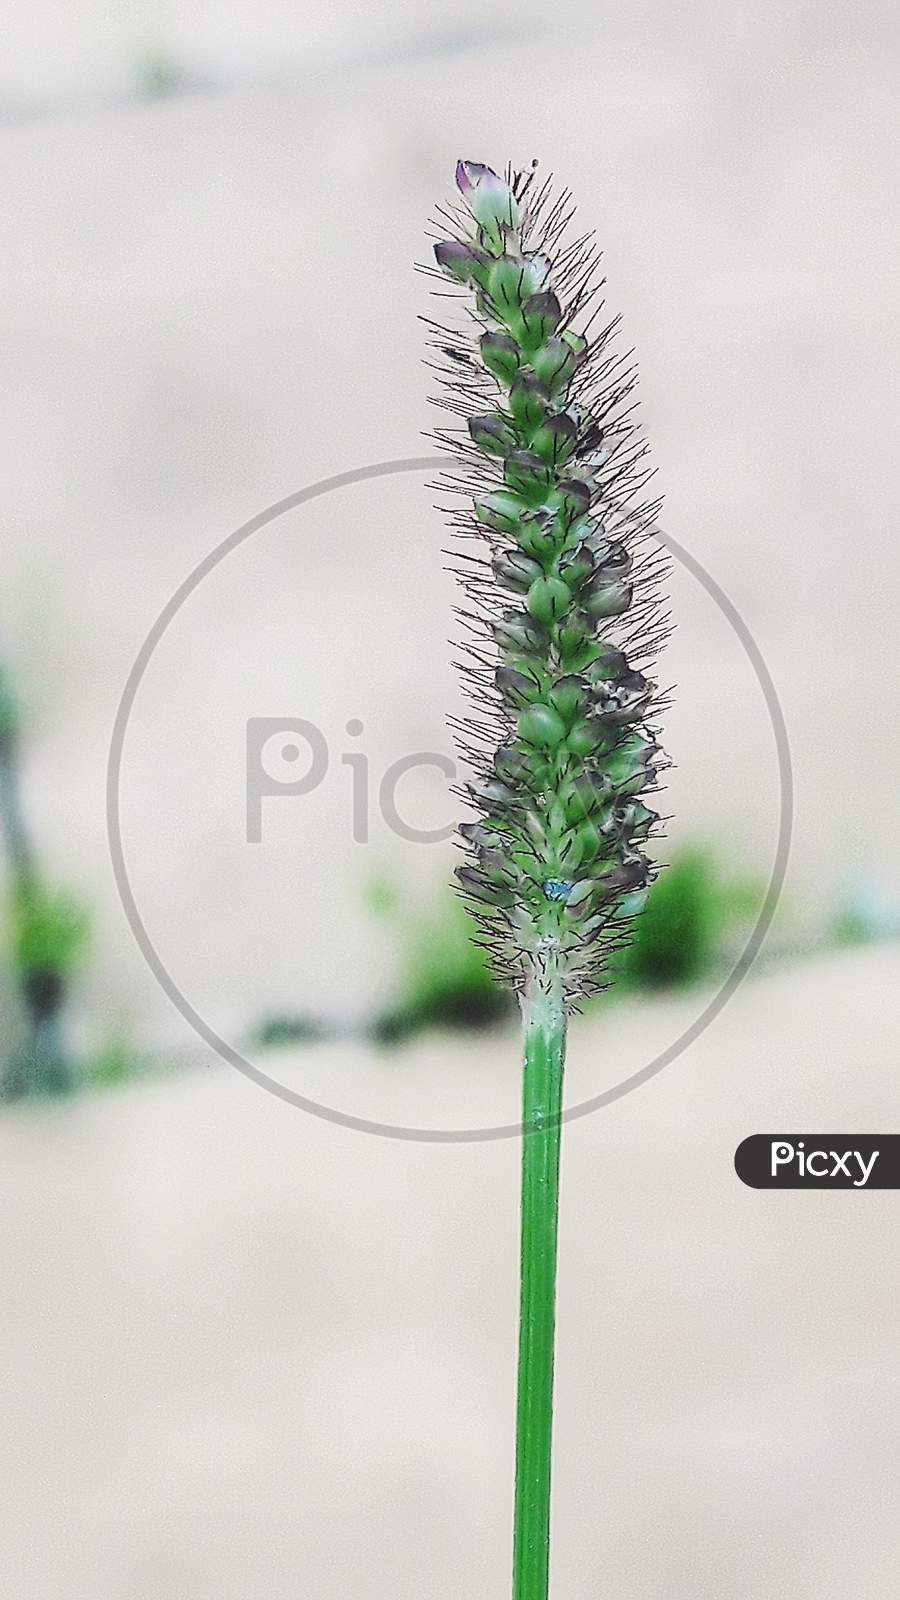 Micro flower photography